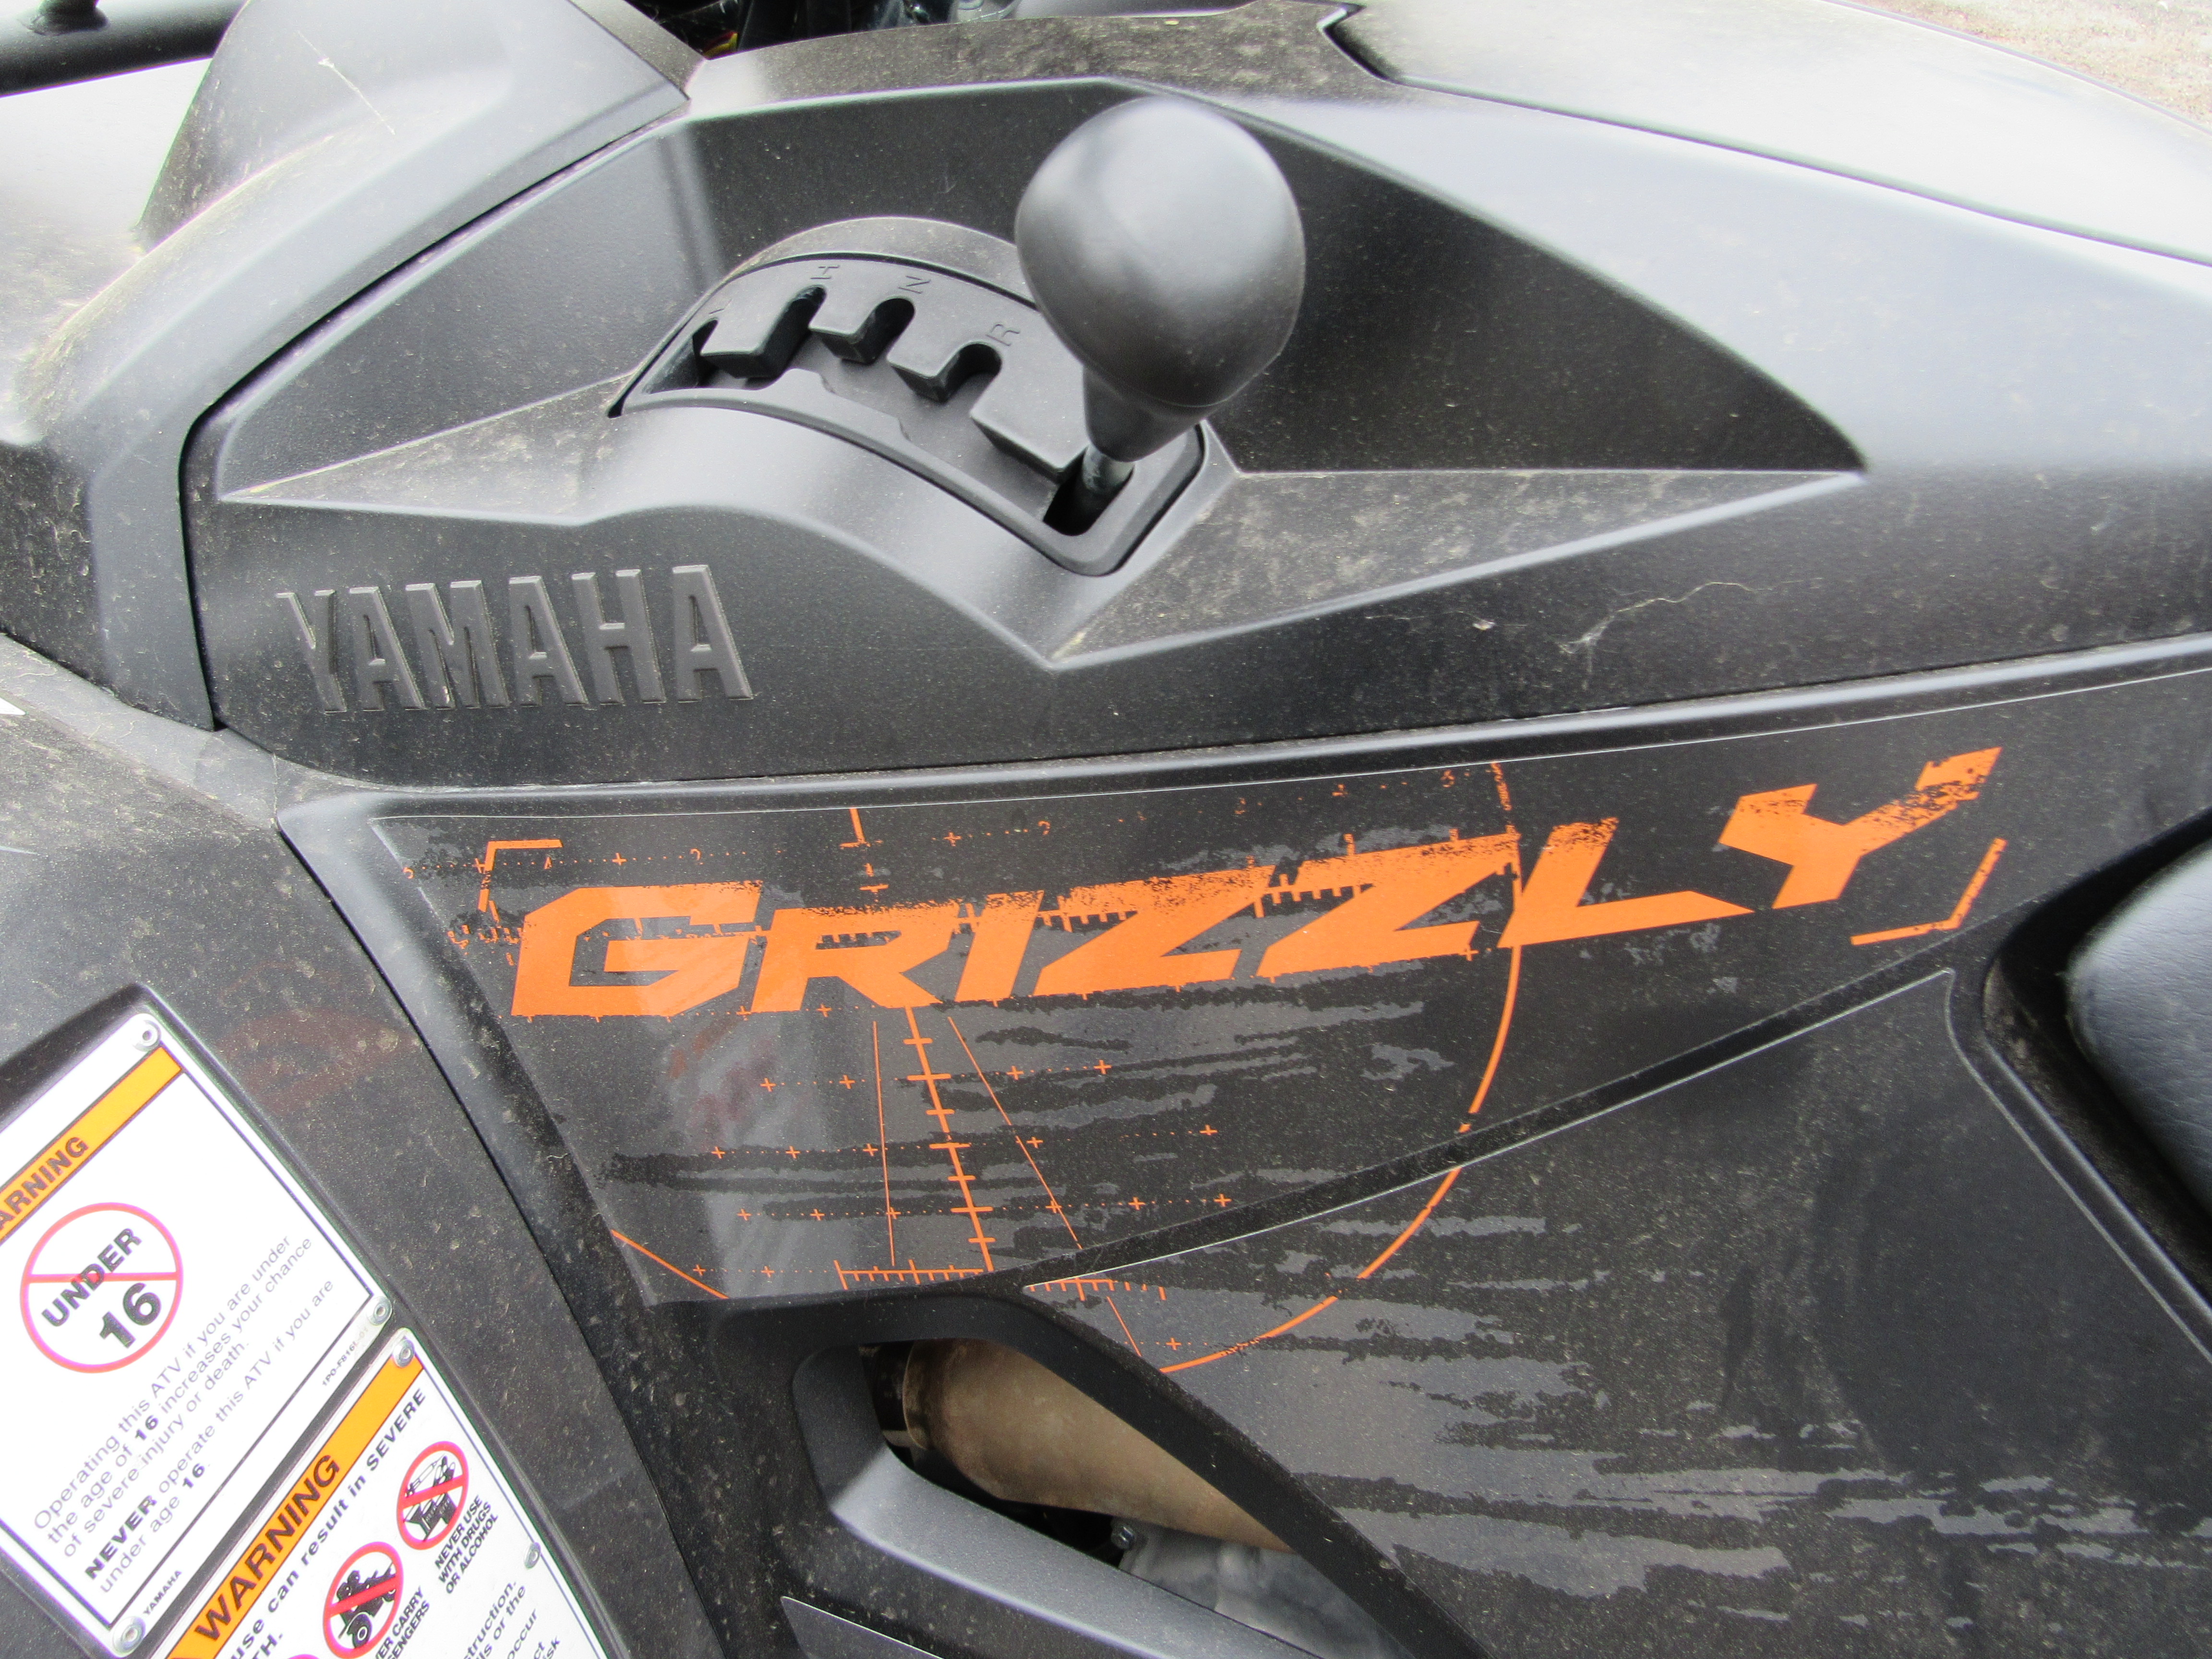 2022 GRIZZLY 700 EPS XT-R GRIZZLY 700 EPS XT-R 0444 - Click for larger photo